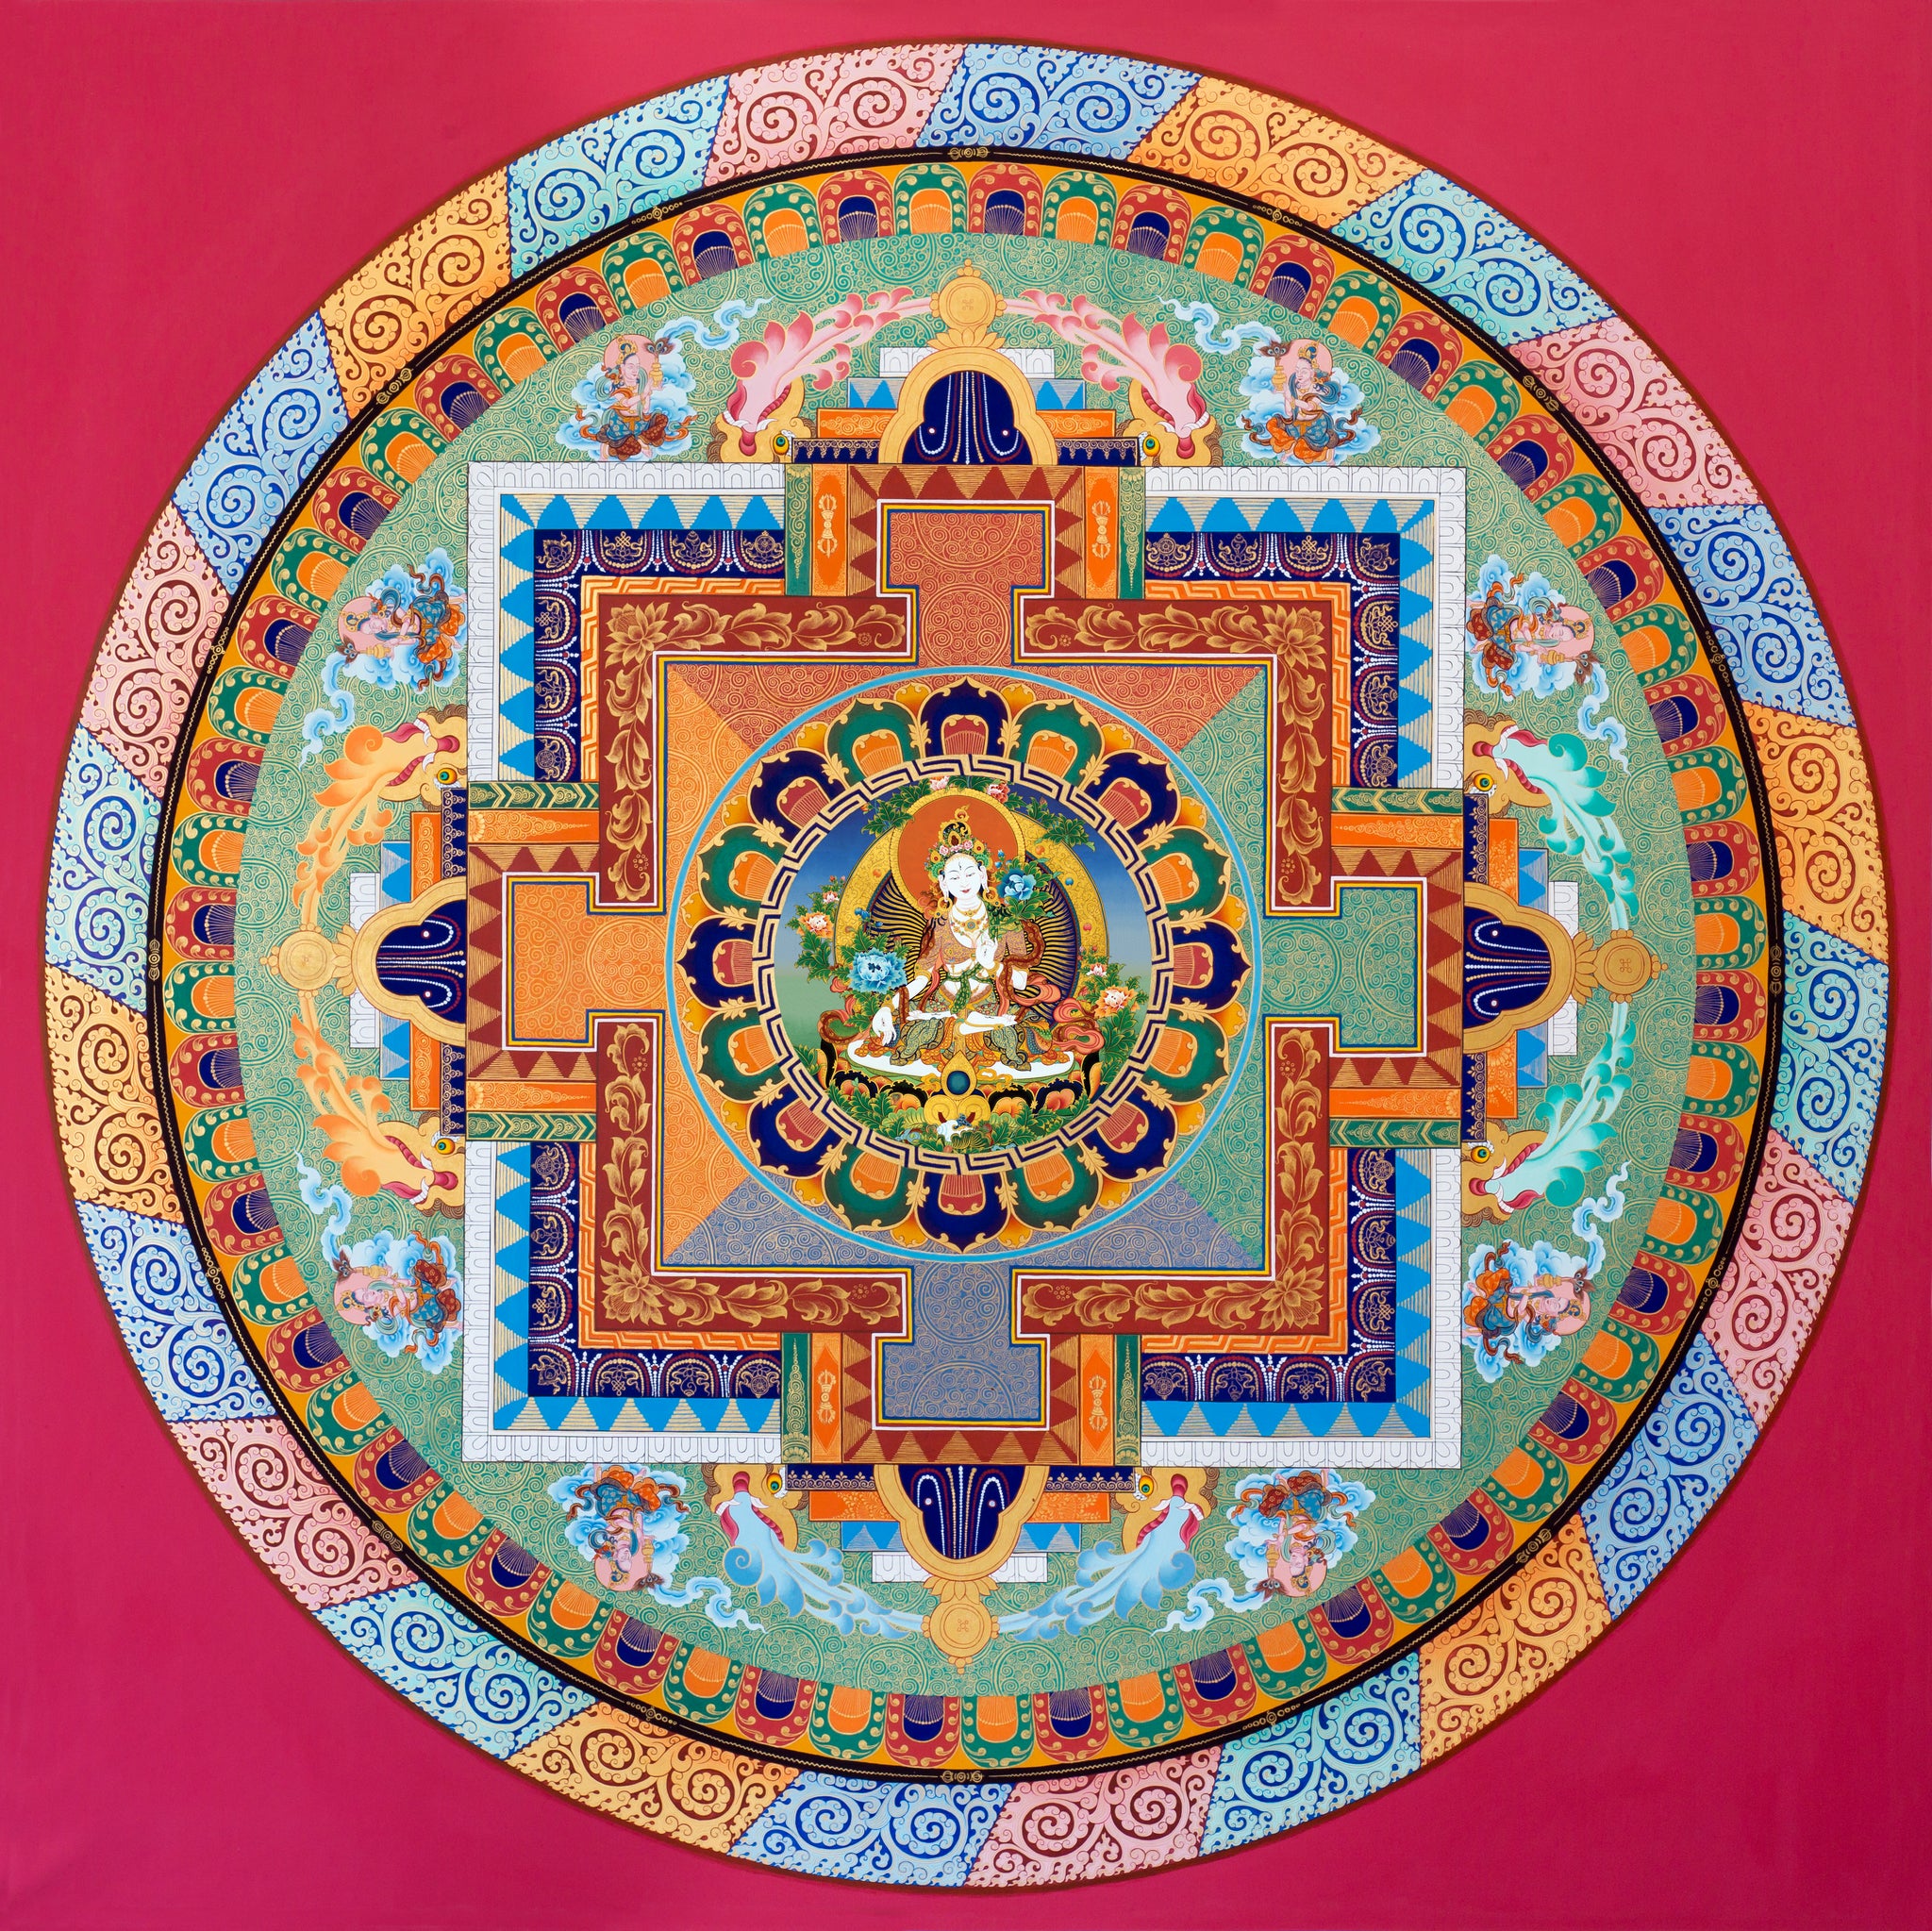 EXCLUSIVE LIMITED EDITIONS (Limited Edition Canvas Print of Tara Mandala, signed by Master Locho)